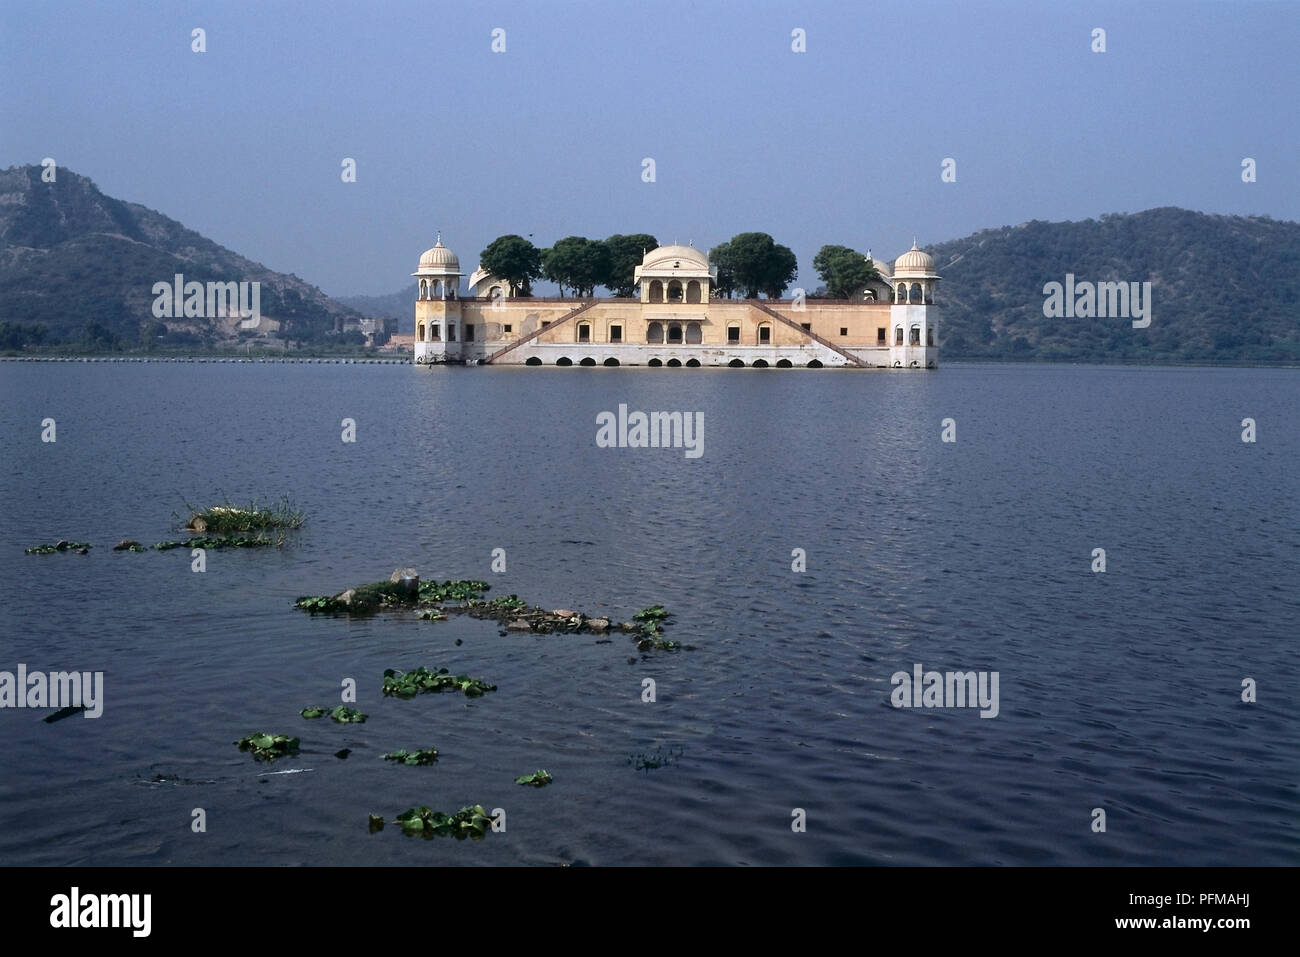 India, Jaipur, picturesque Jal Mahal, Water Palace, seemingly afloat in the monsoon, yellow and white painted palace, semi-octagonal tower topped by elegant cupola at each corner, courtyard treetops visible behind facade, vast lake in foreground. Stock Photo